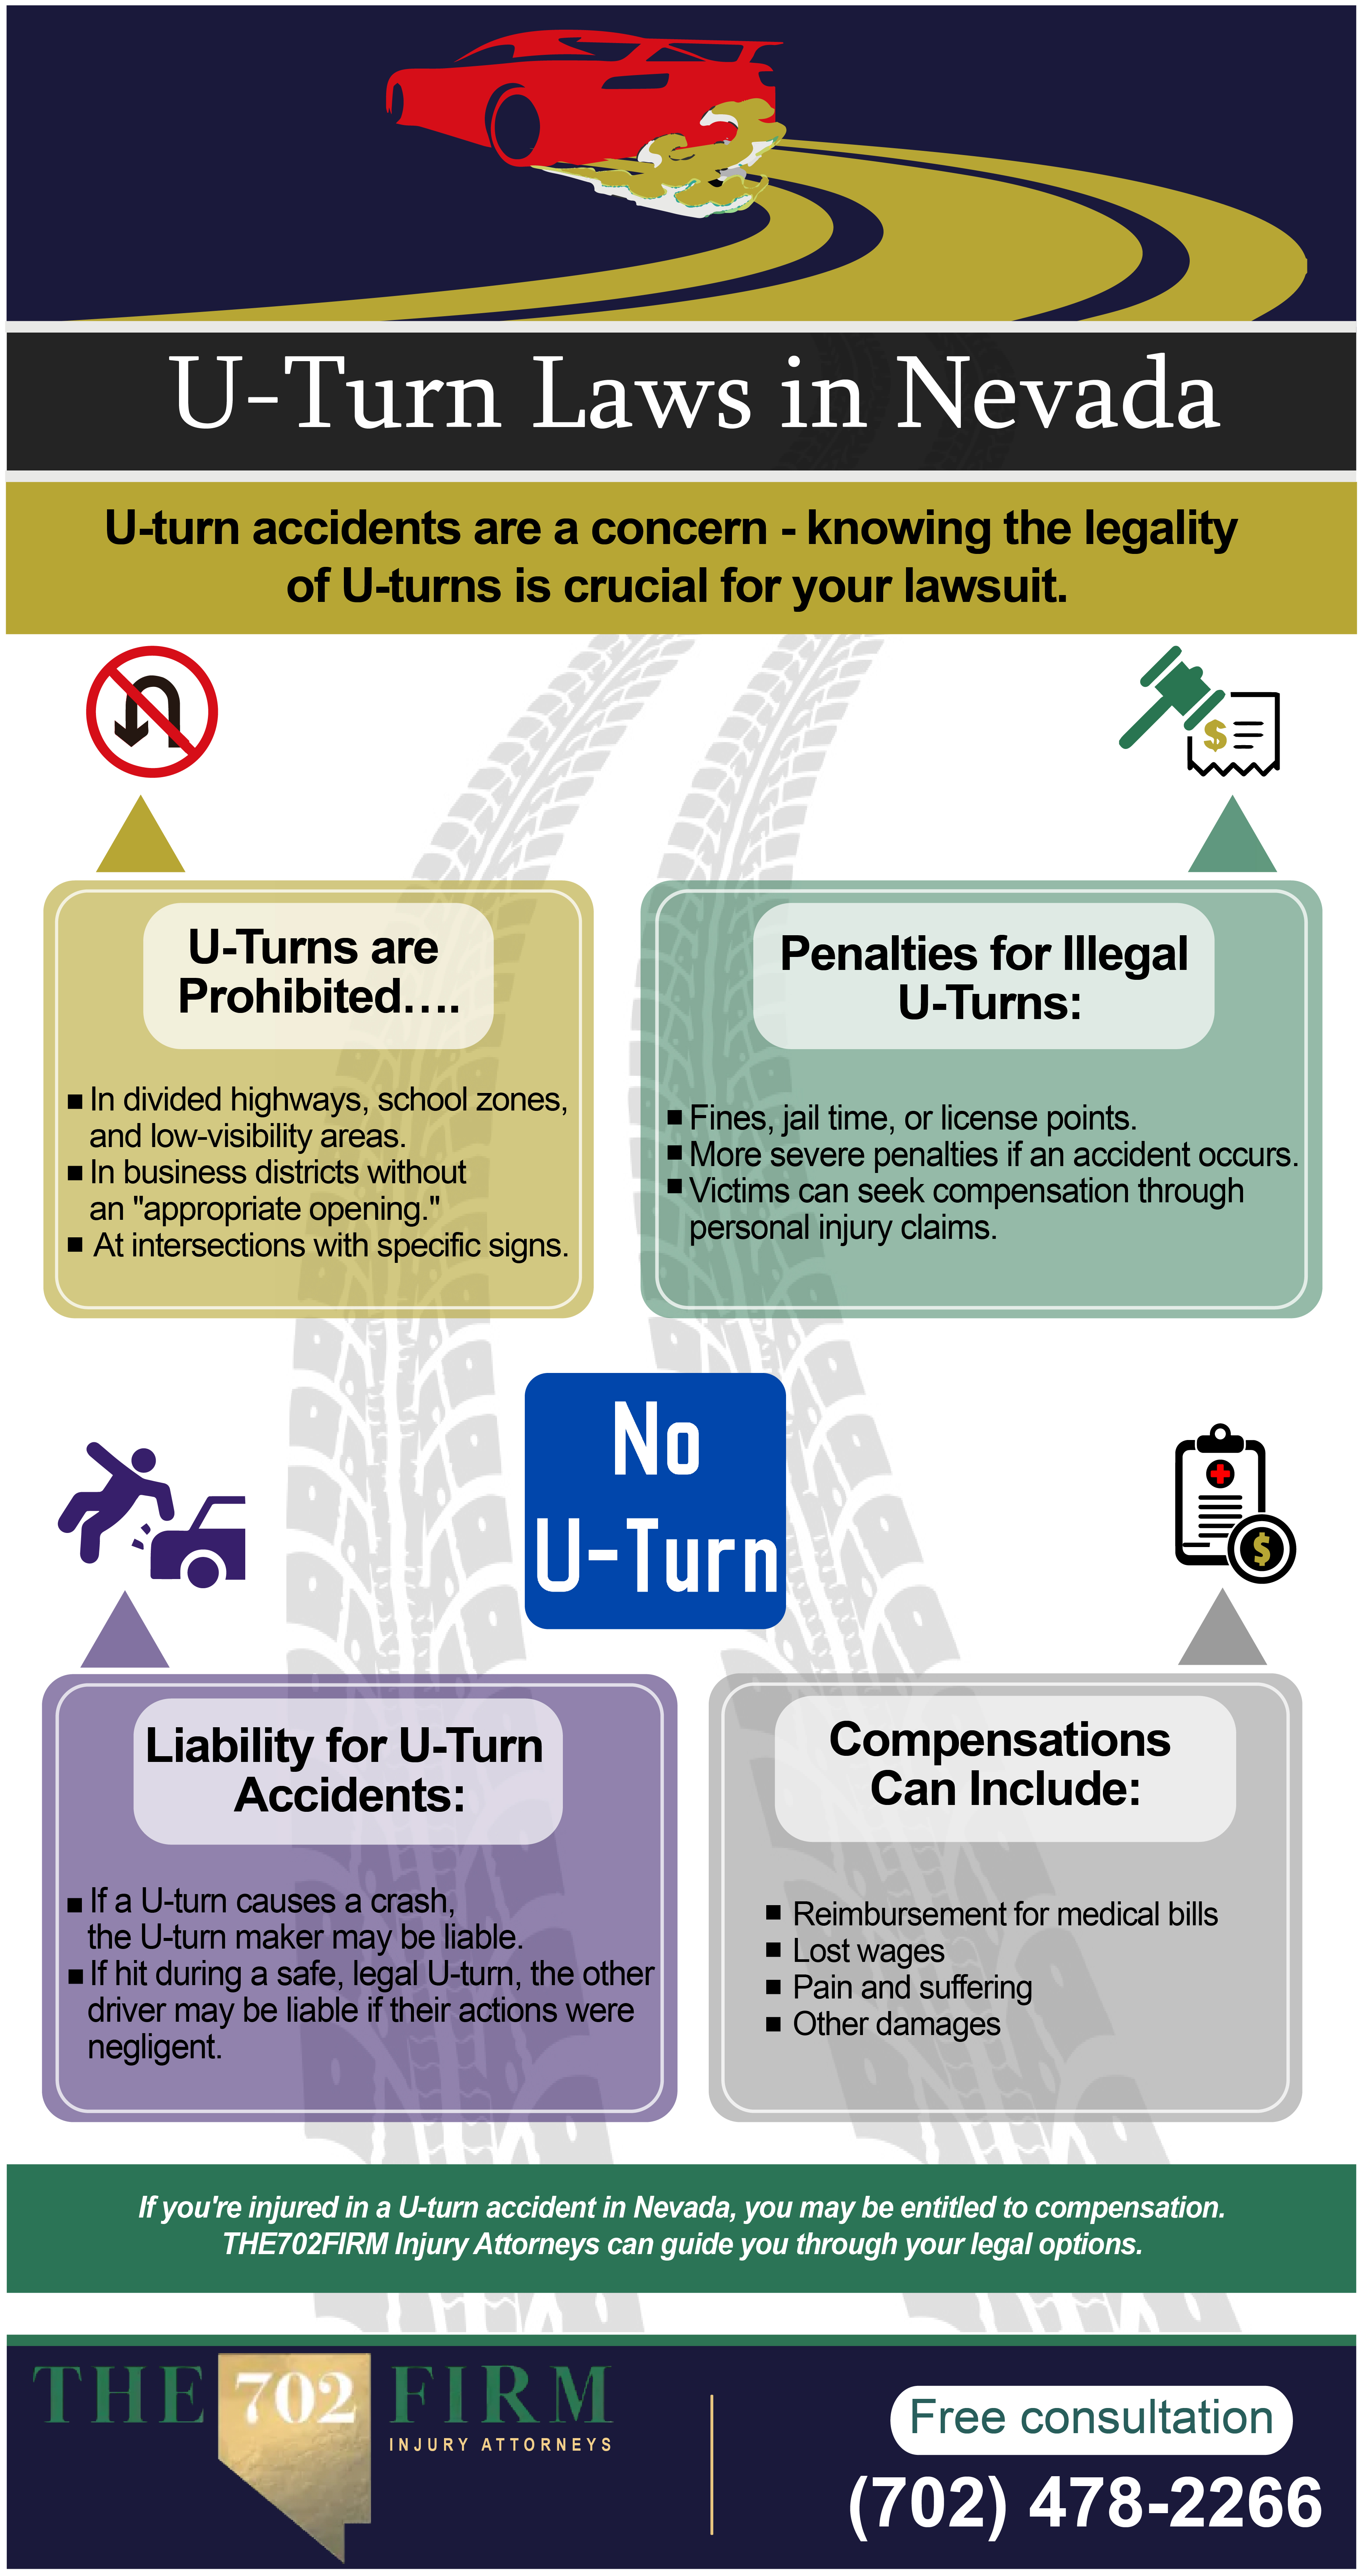 U-Turn Laws in Nevada Infographic